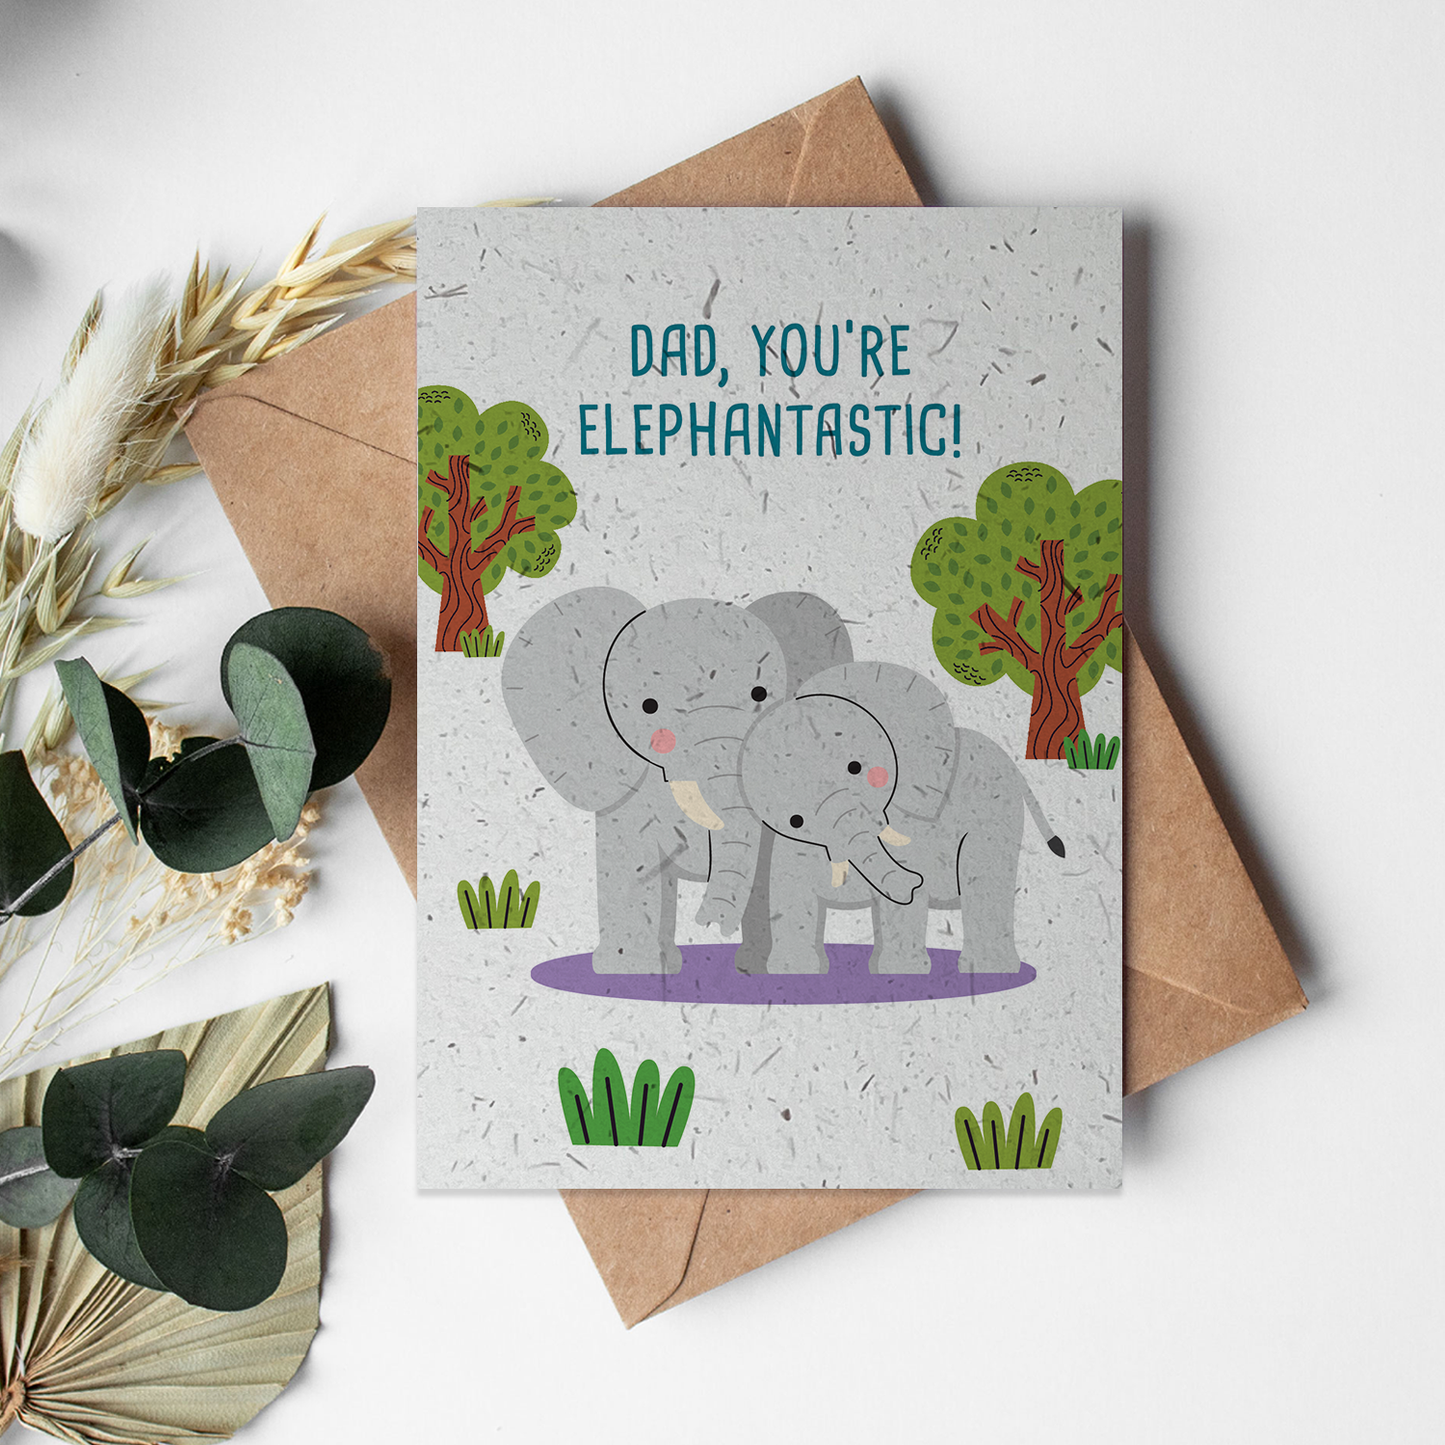 Father's Day - Elephantastic!